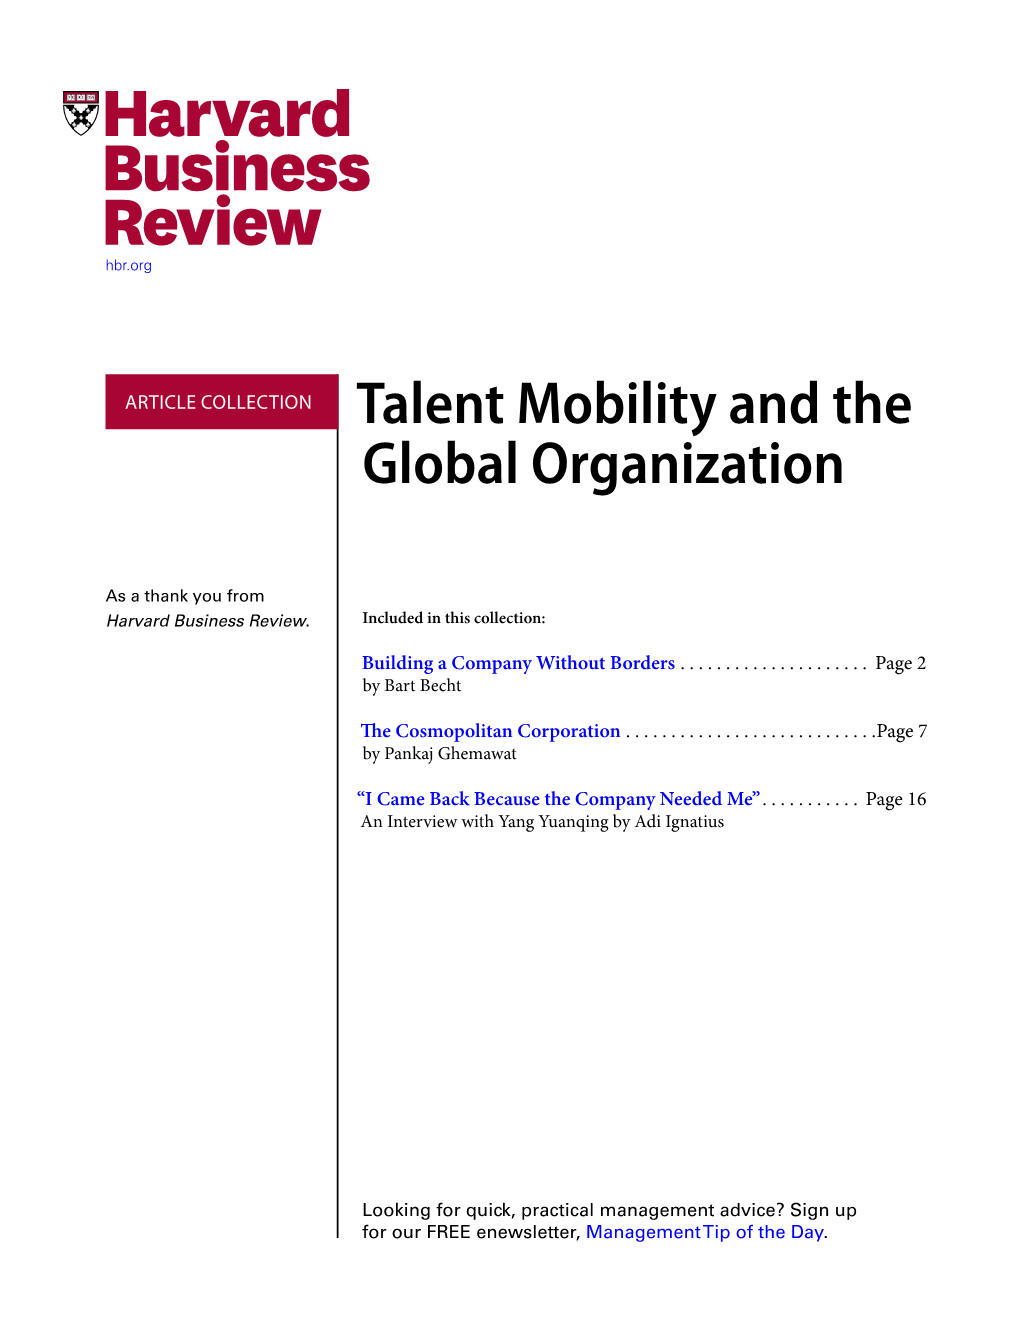 Talent Mobility and the Global Organization